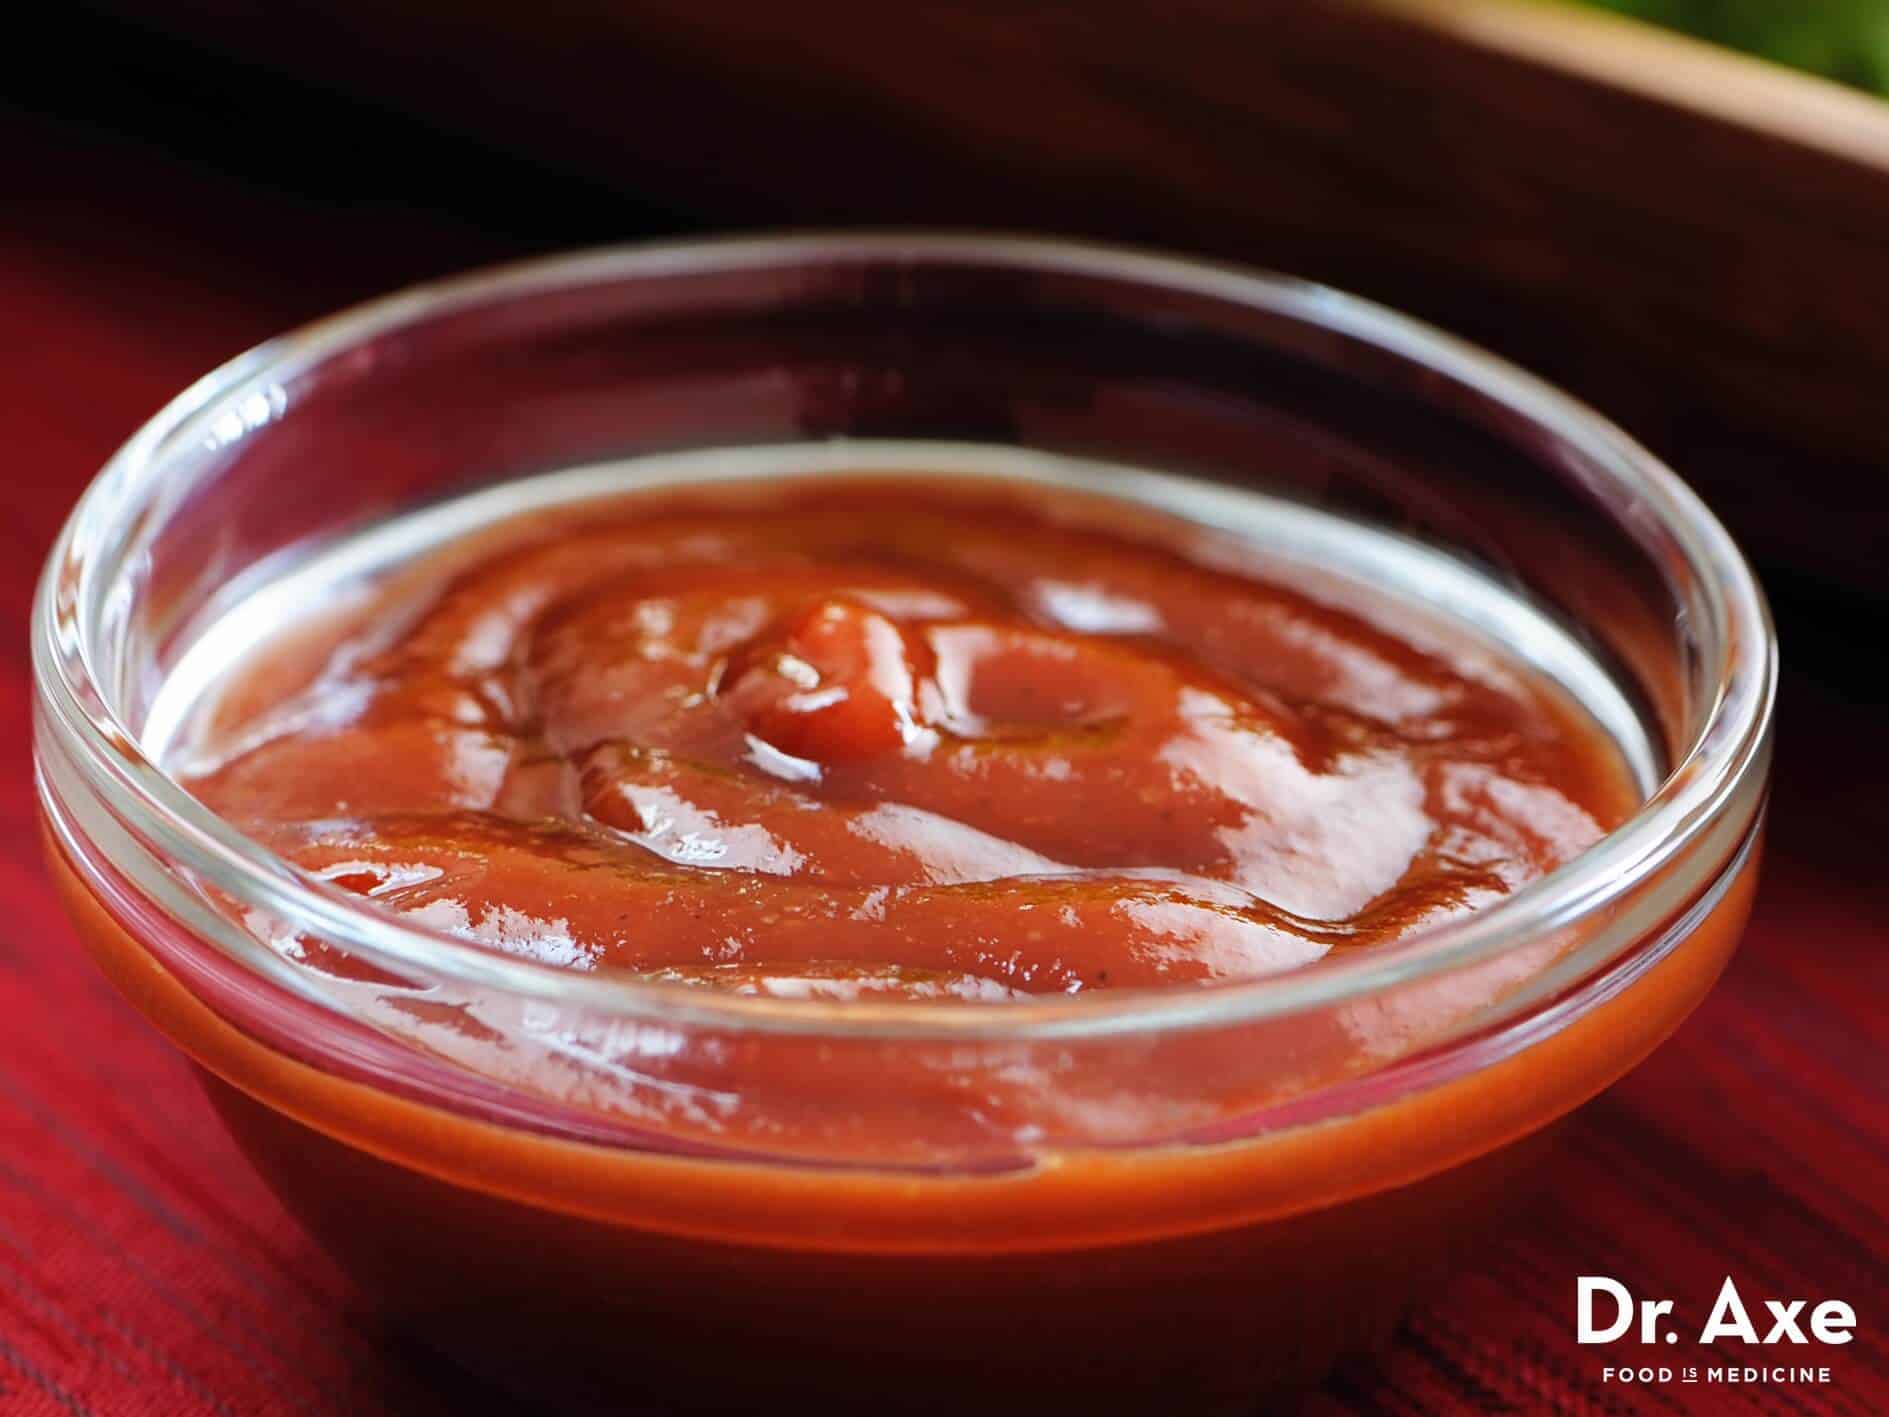 Sweet tangy barbecue sauce recipe - Dr. Axe